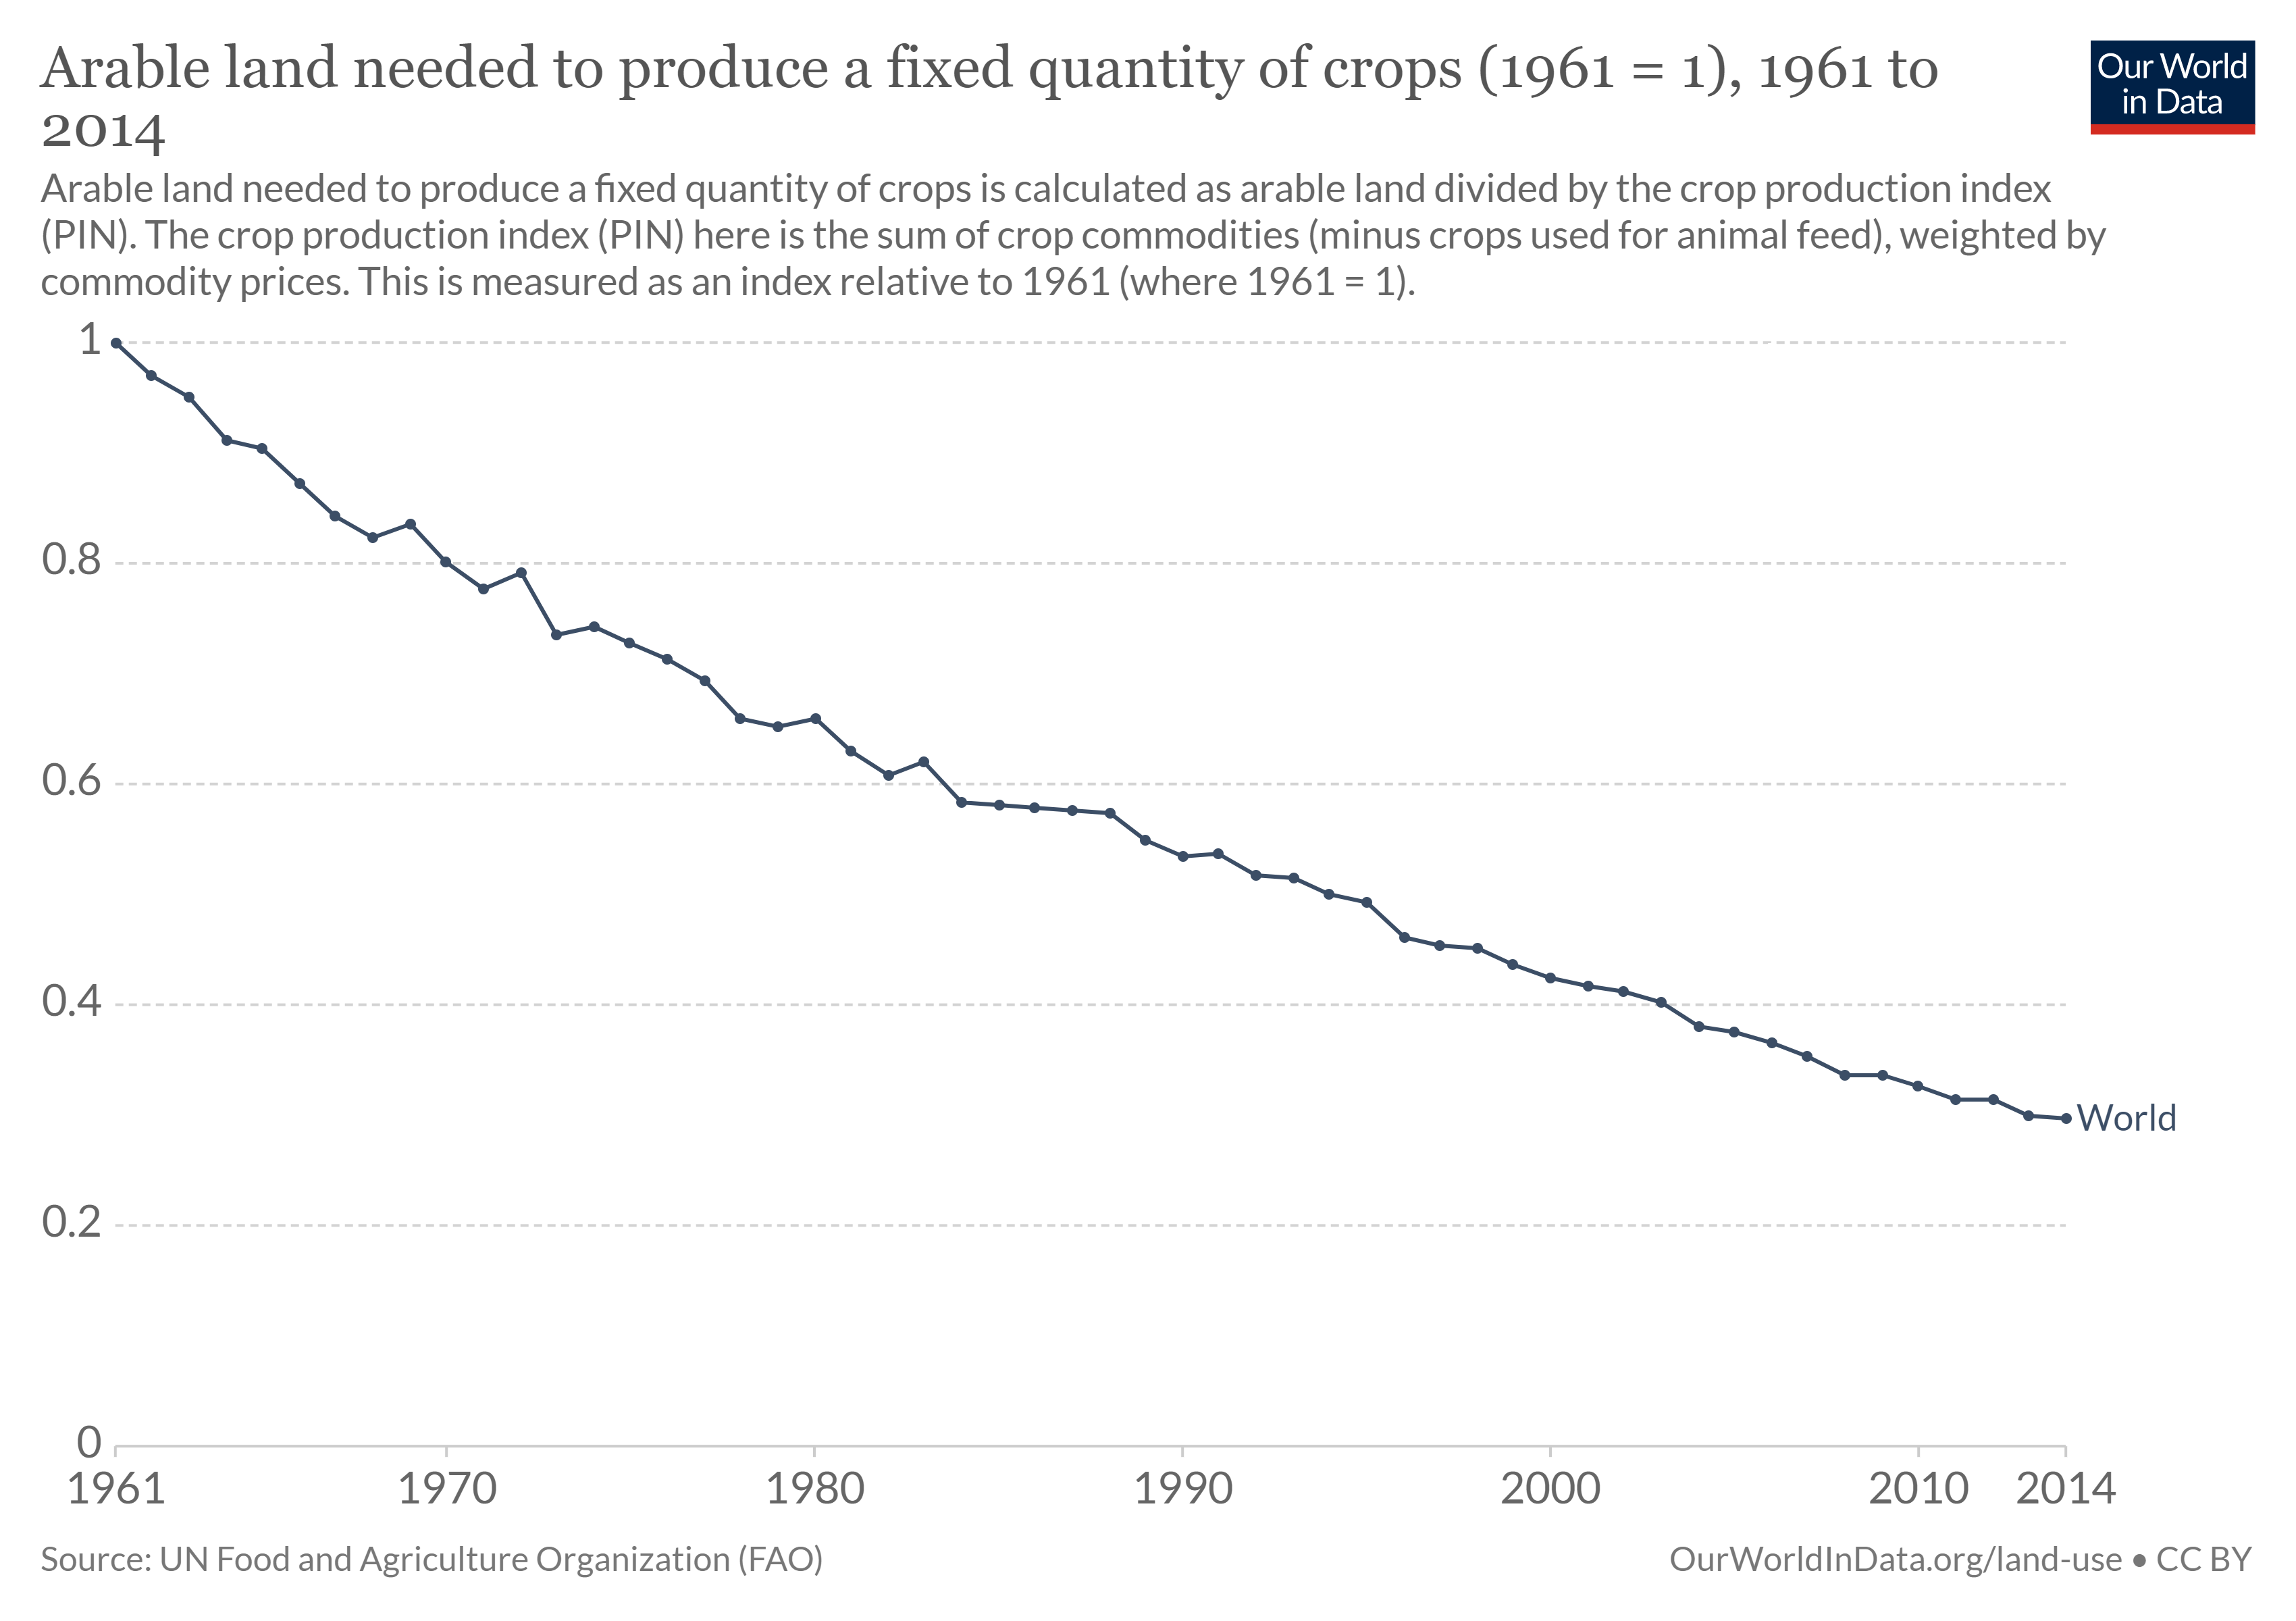 Line graph of land per unit of crop measured as an index ranging from 0 to 1. This decreased from 1 in 1961 to 0.3 in 2014.